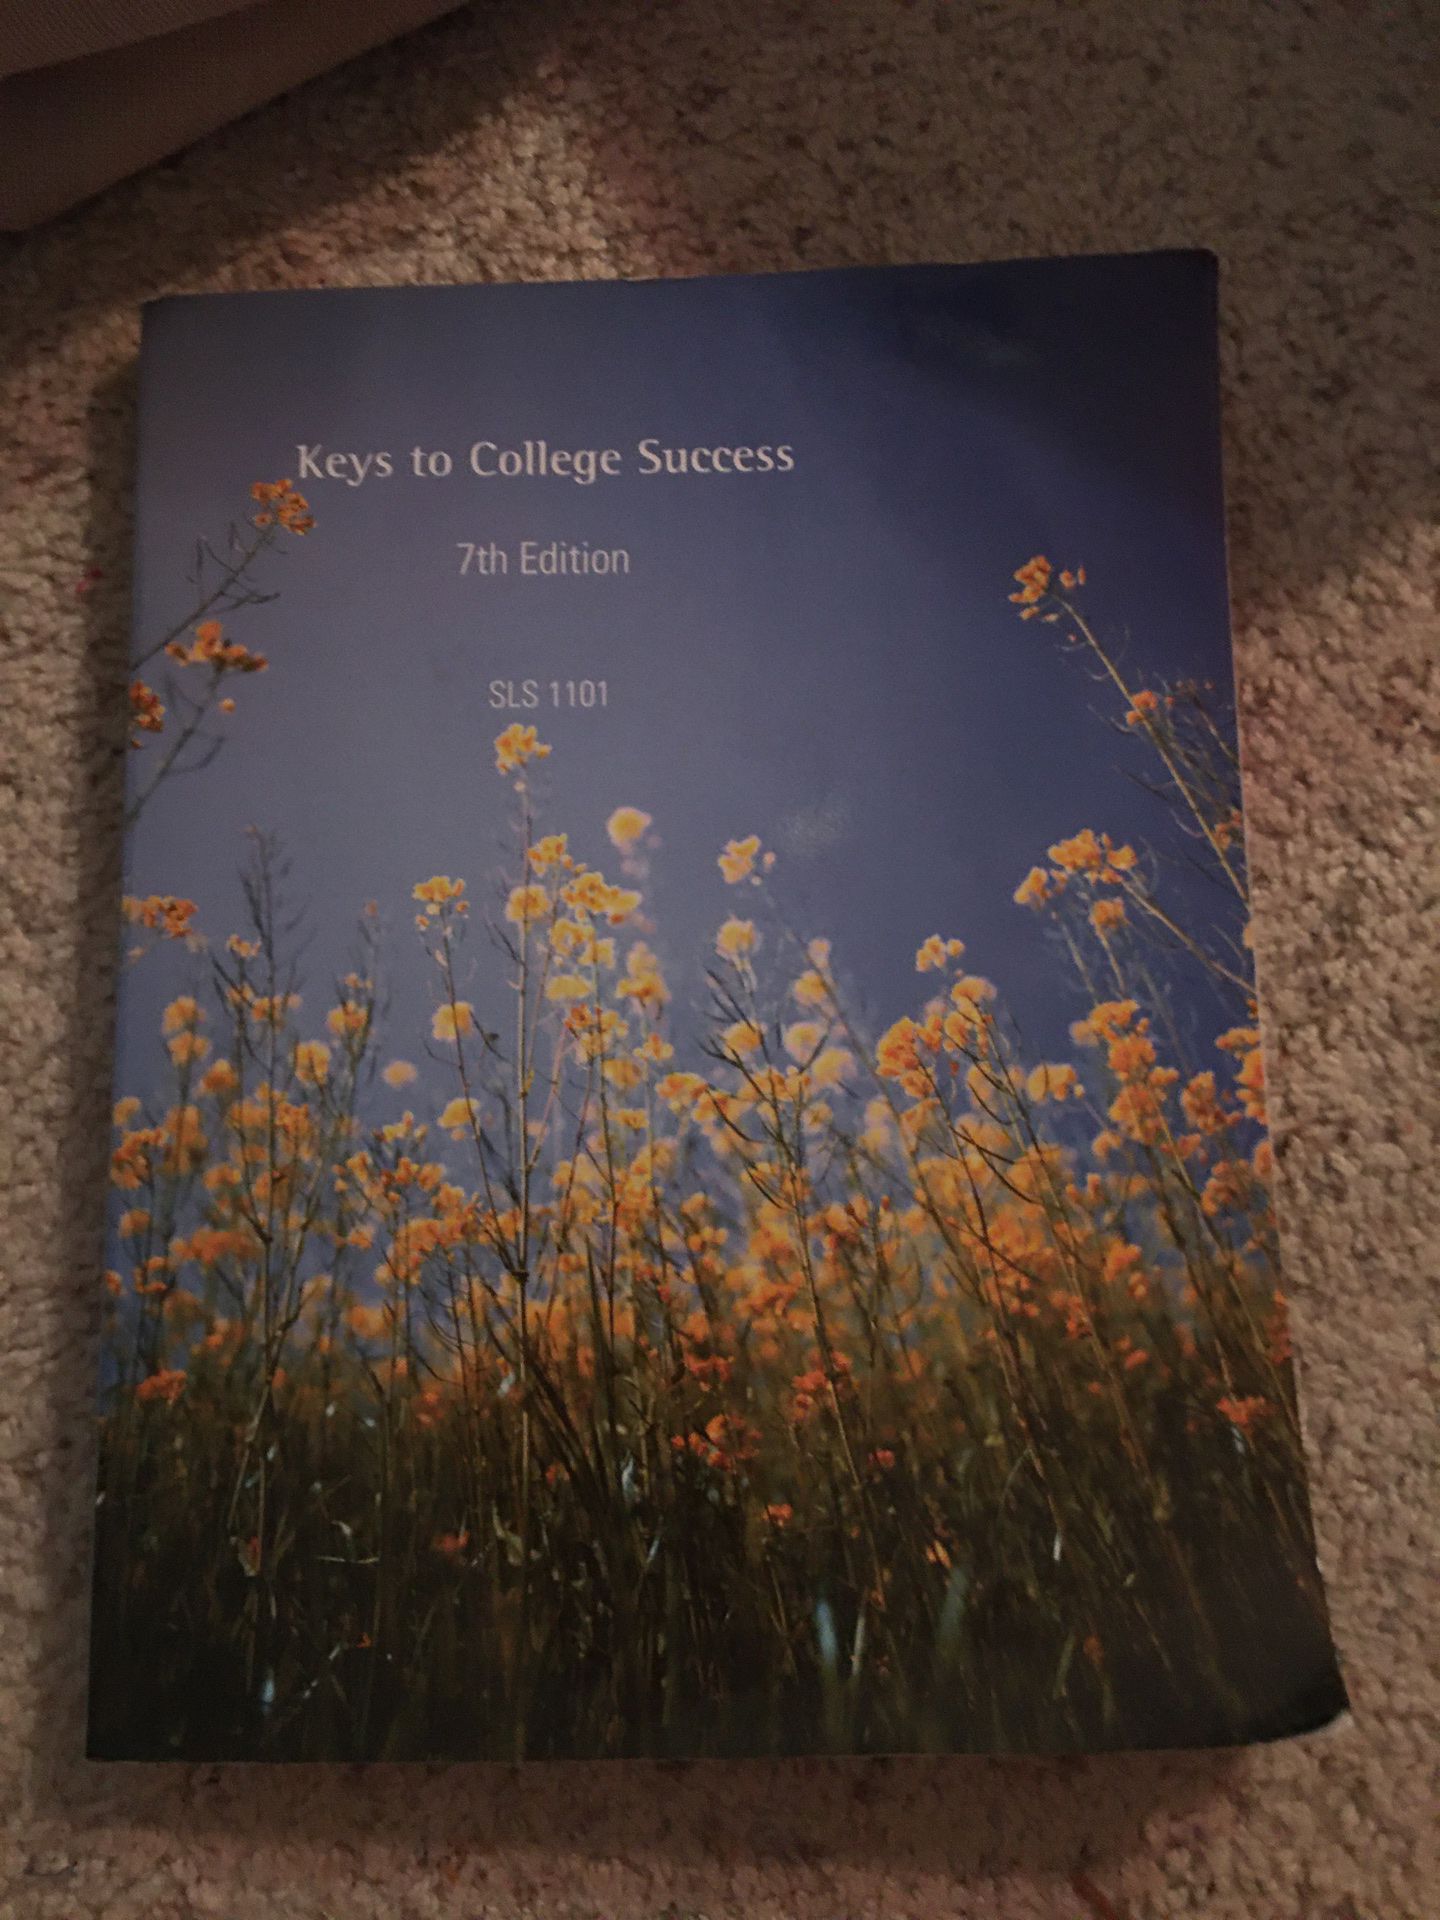 Keys to college success textbook